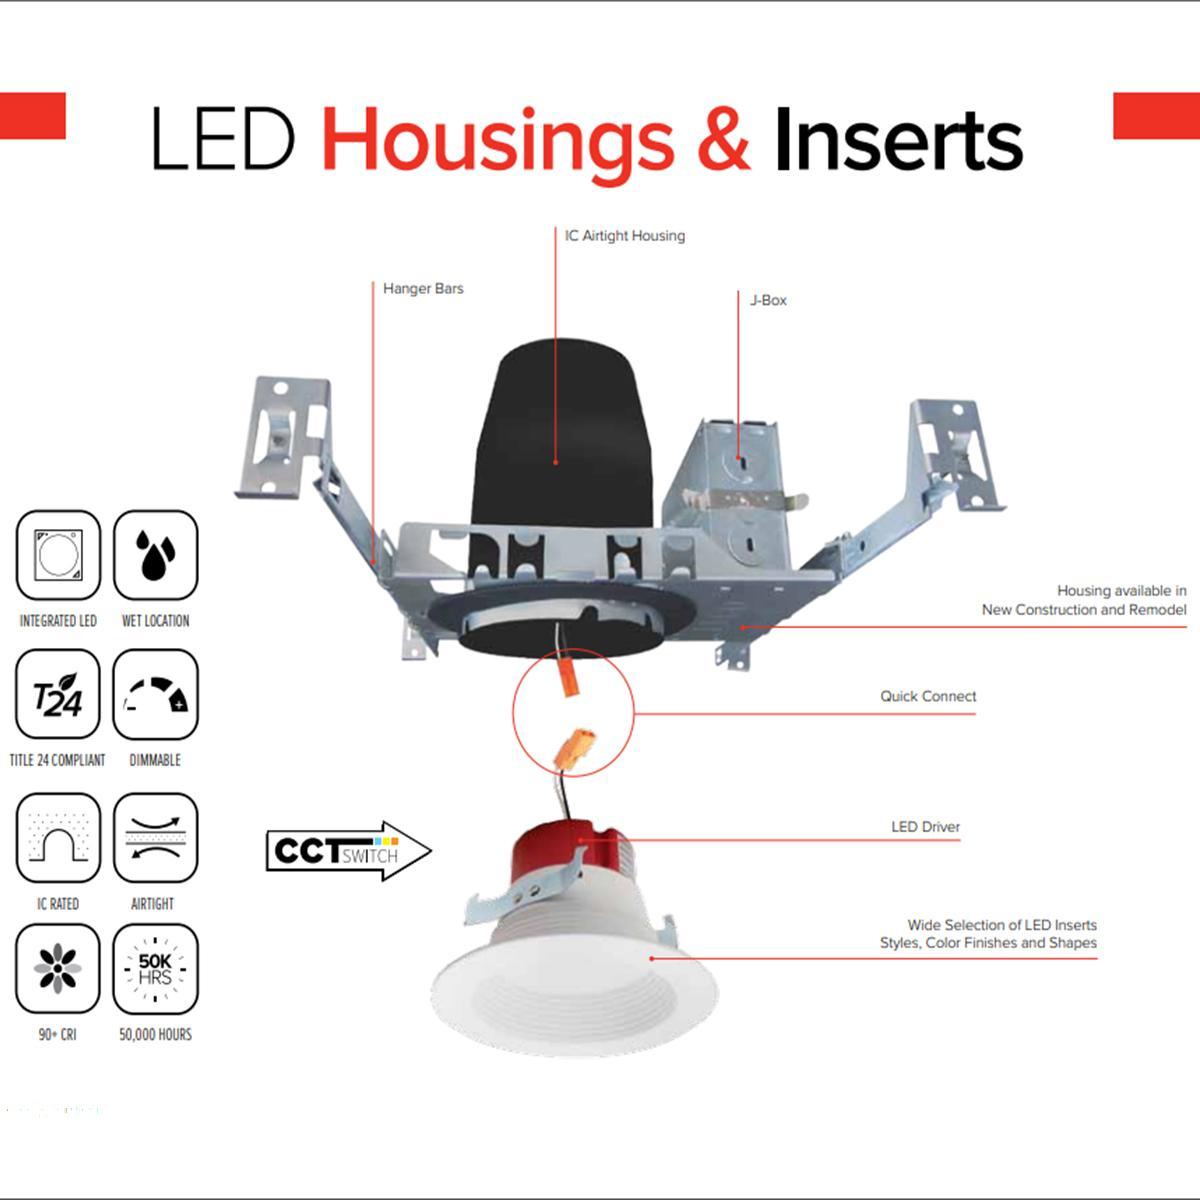 LED New Construction Housing, 6 in, IC Air-Tight, Quick Connect, 120V